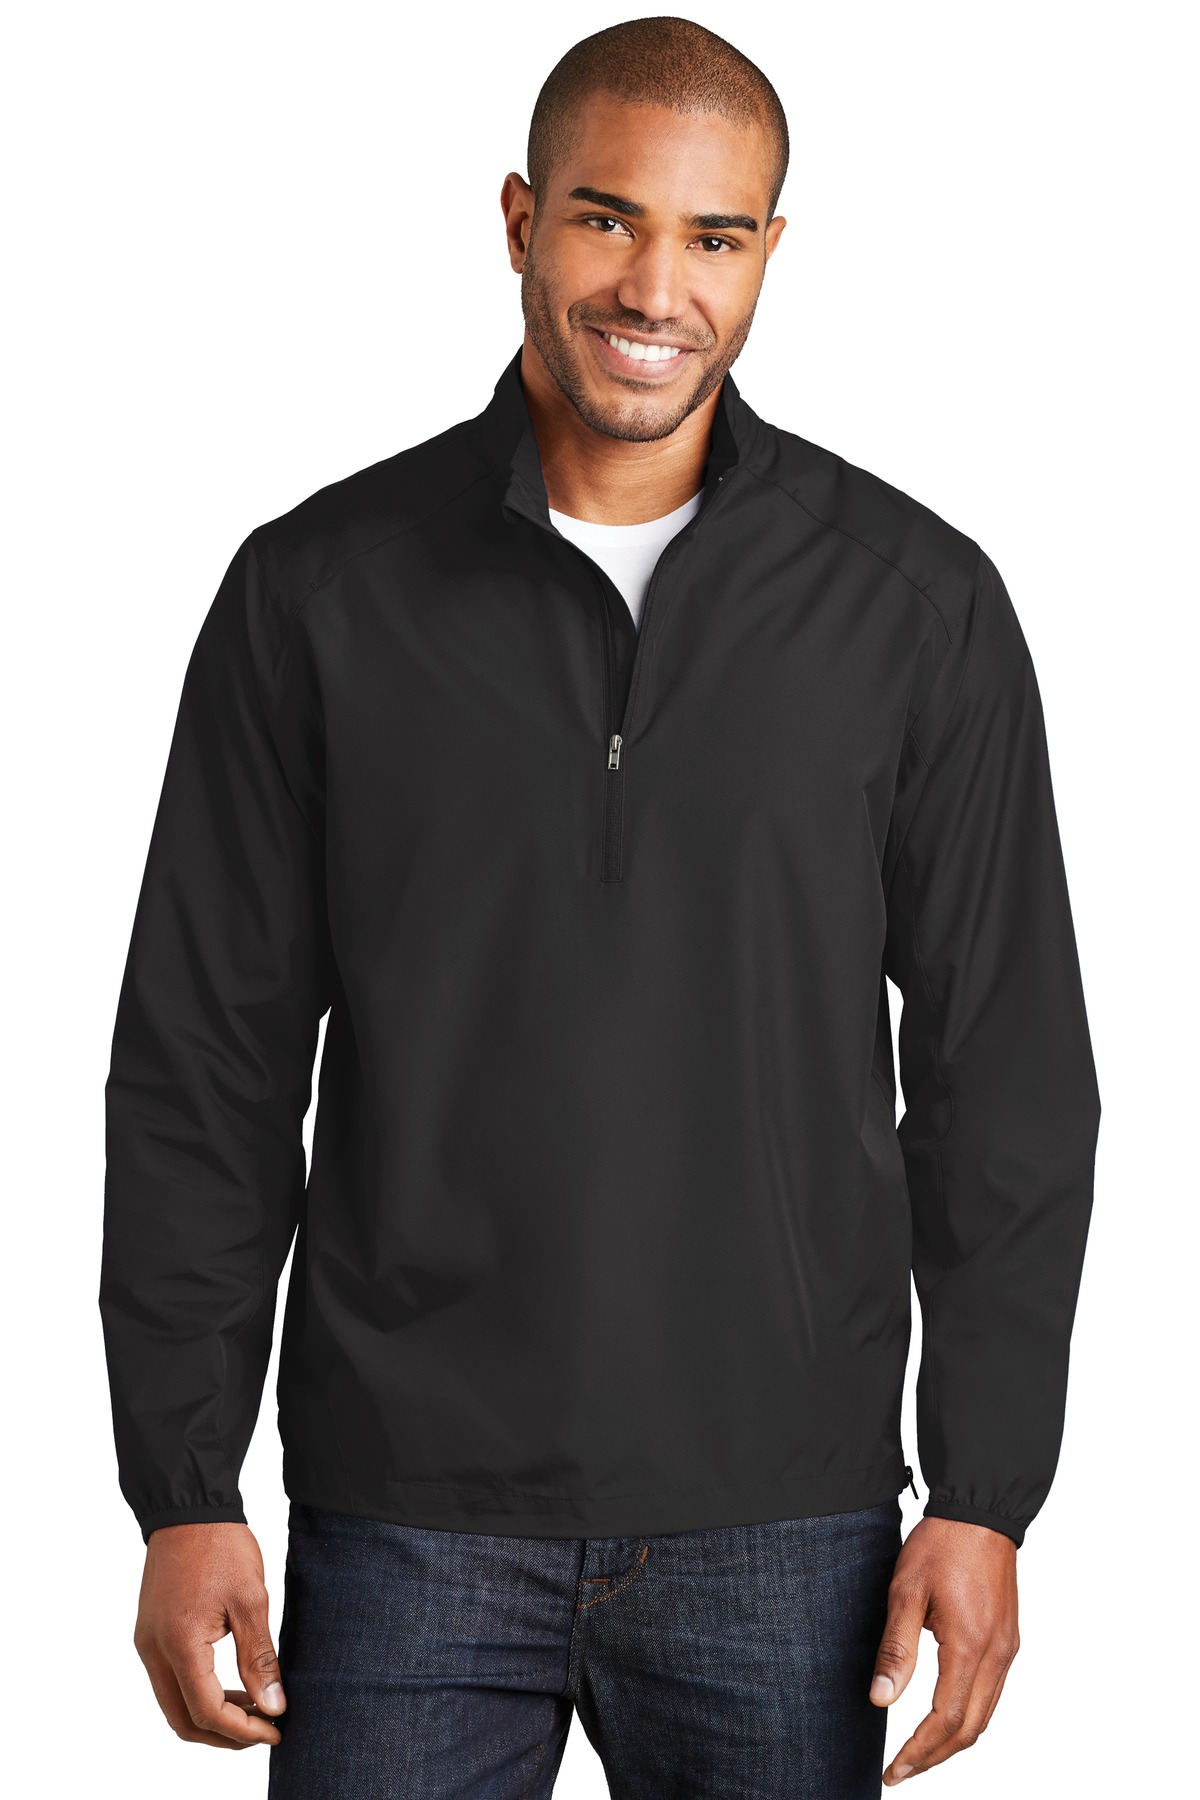 Port Authority Hospitality Outerwear ® Zephyr 1/2-Zip Pullover.-Port Authority